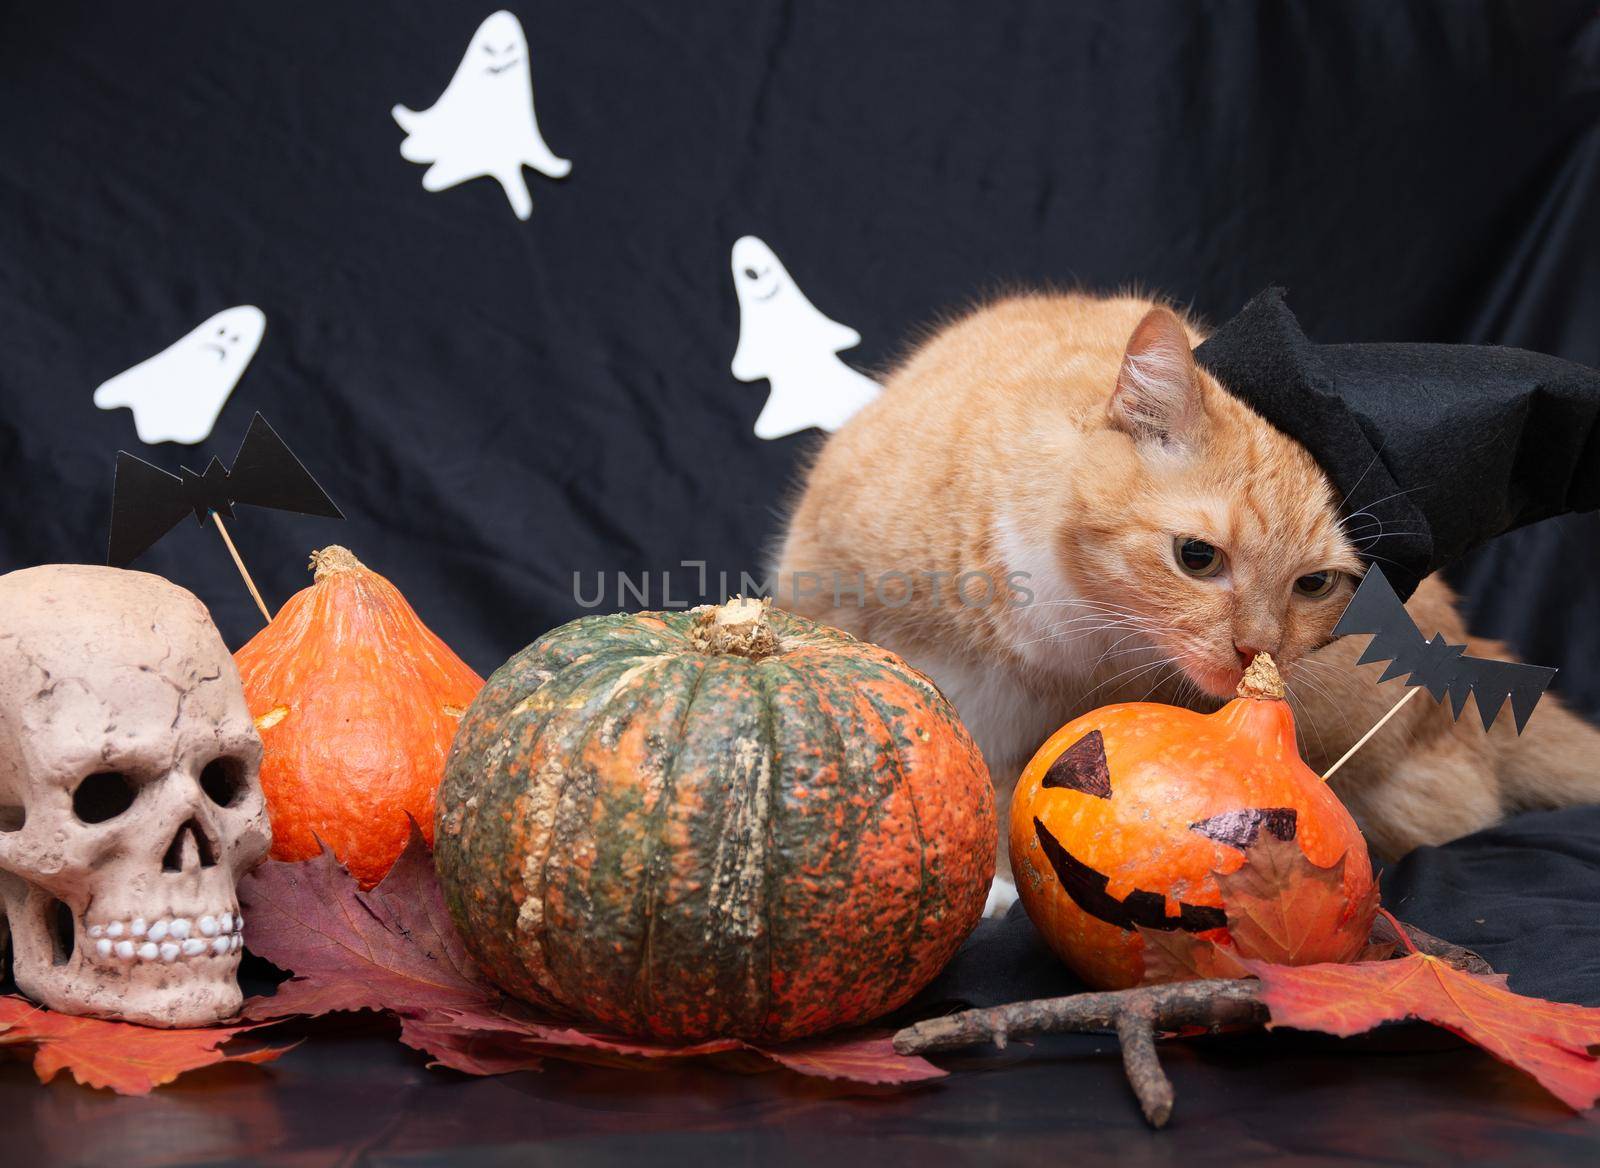 red cat in a black hat with halloween pumpkins and a skull on a dark background front view ghost on a background white black orange pumpkin auturm leaves on a floor